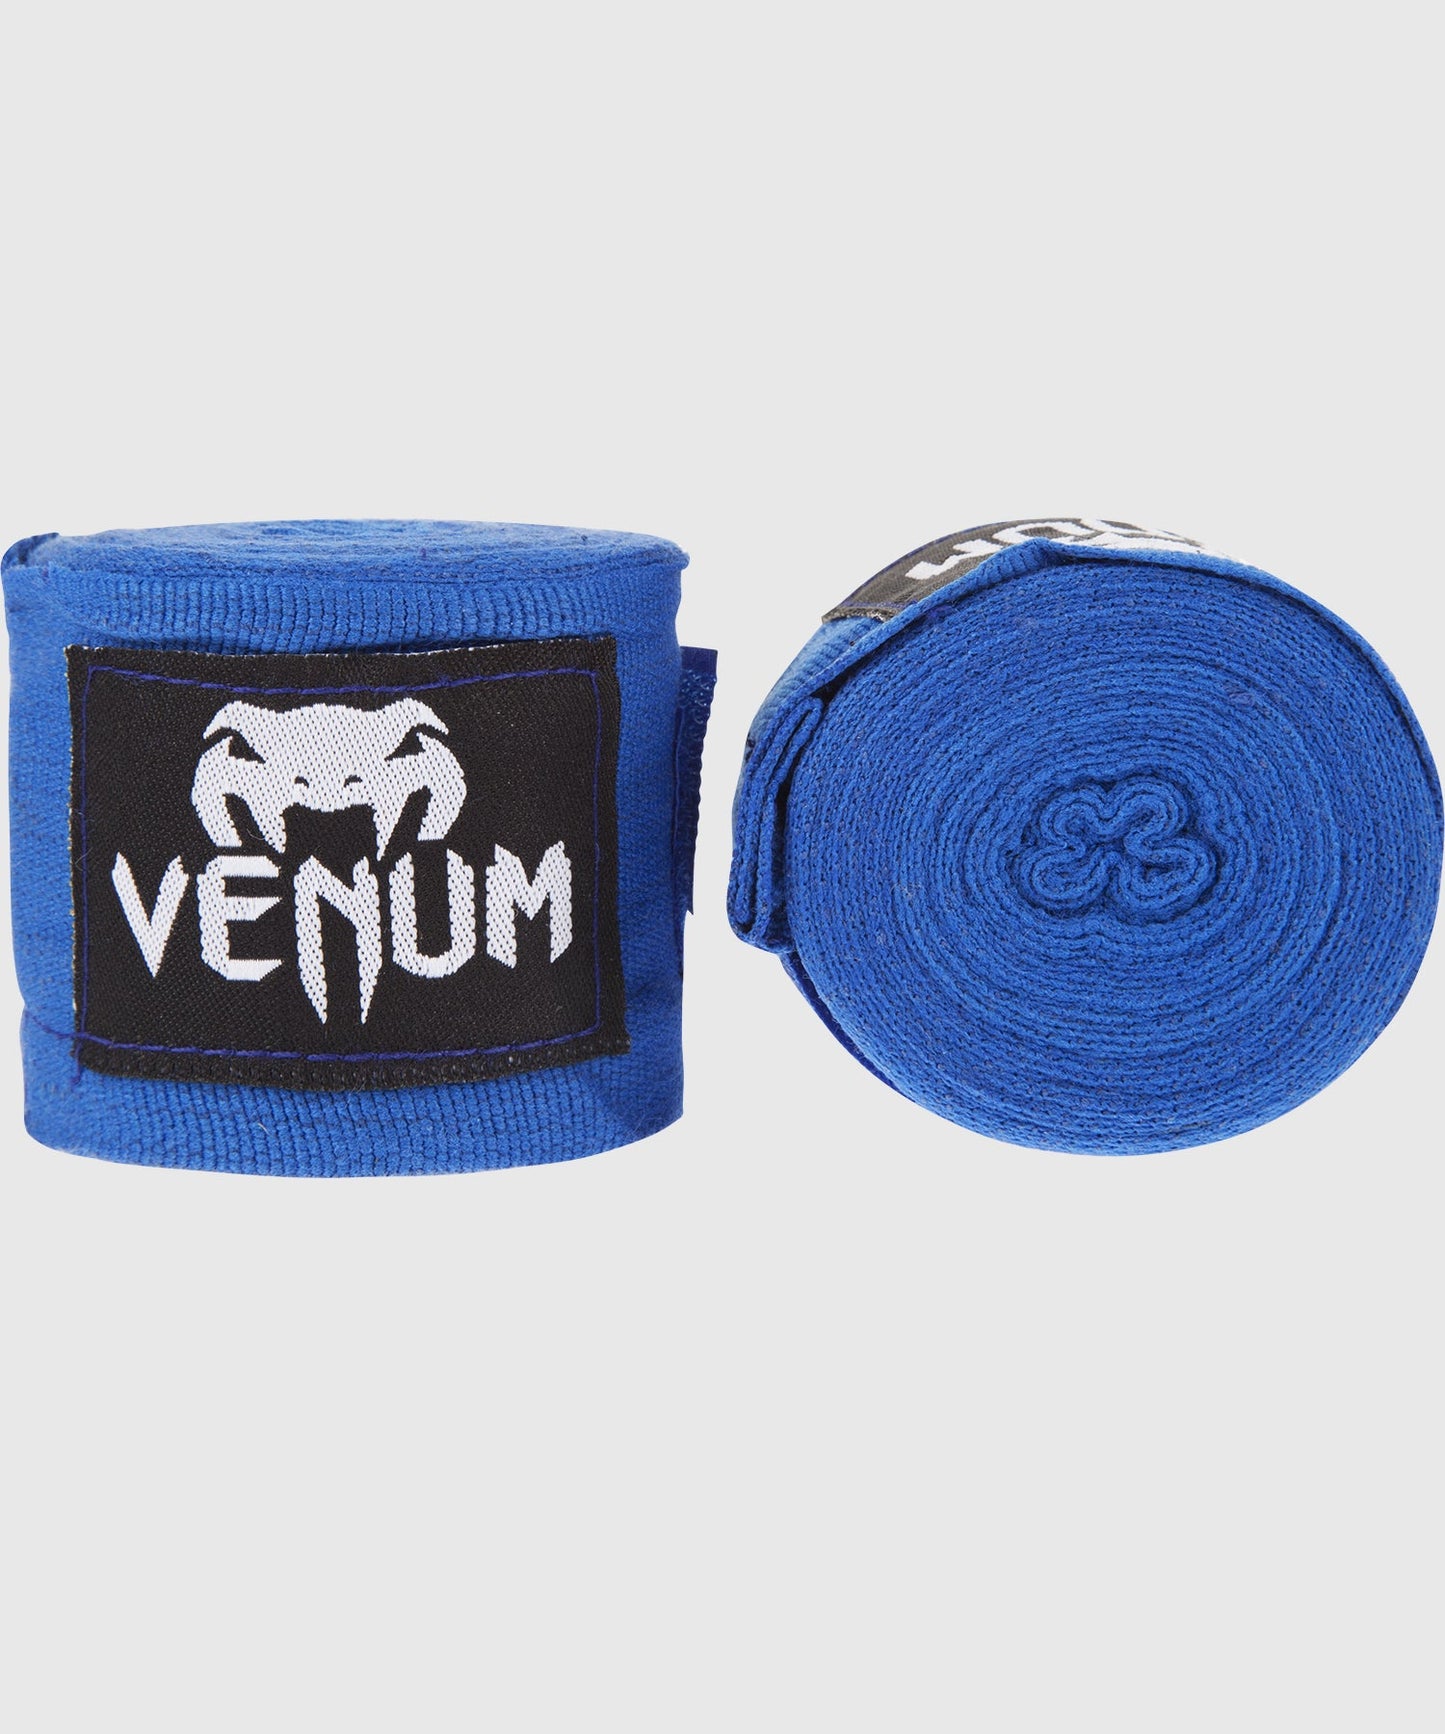 Venum Kontact Boxing Hand Wraps - Blue - 180 in